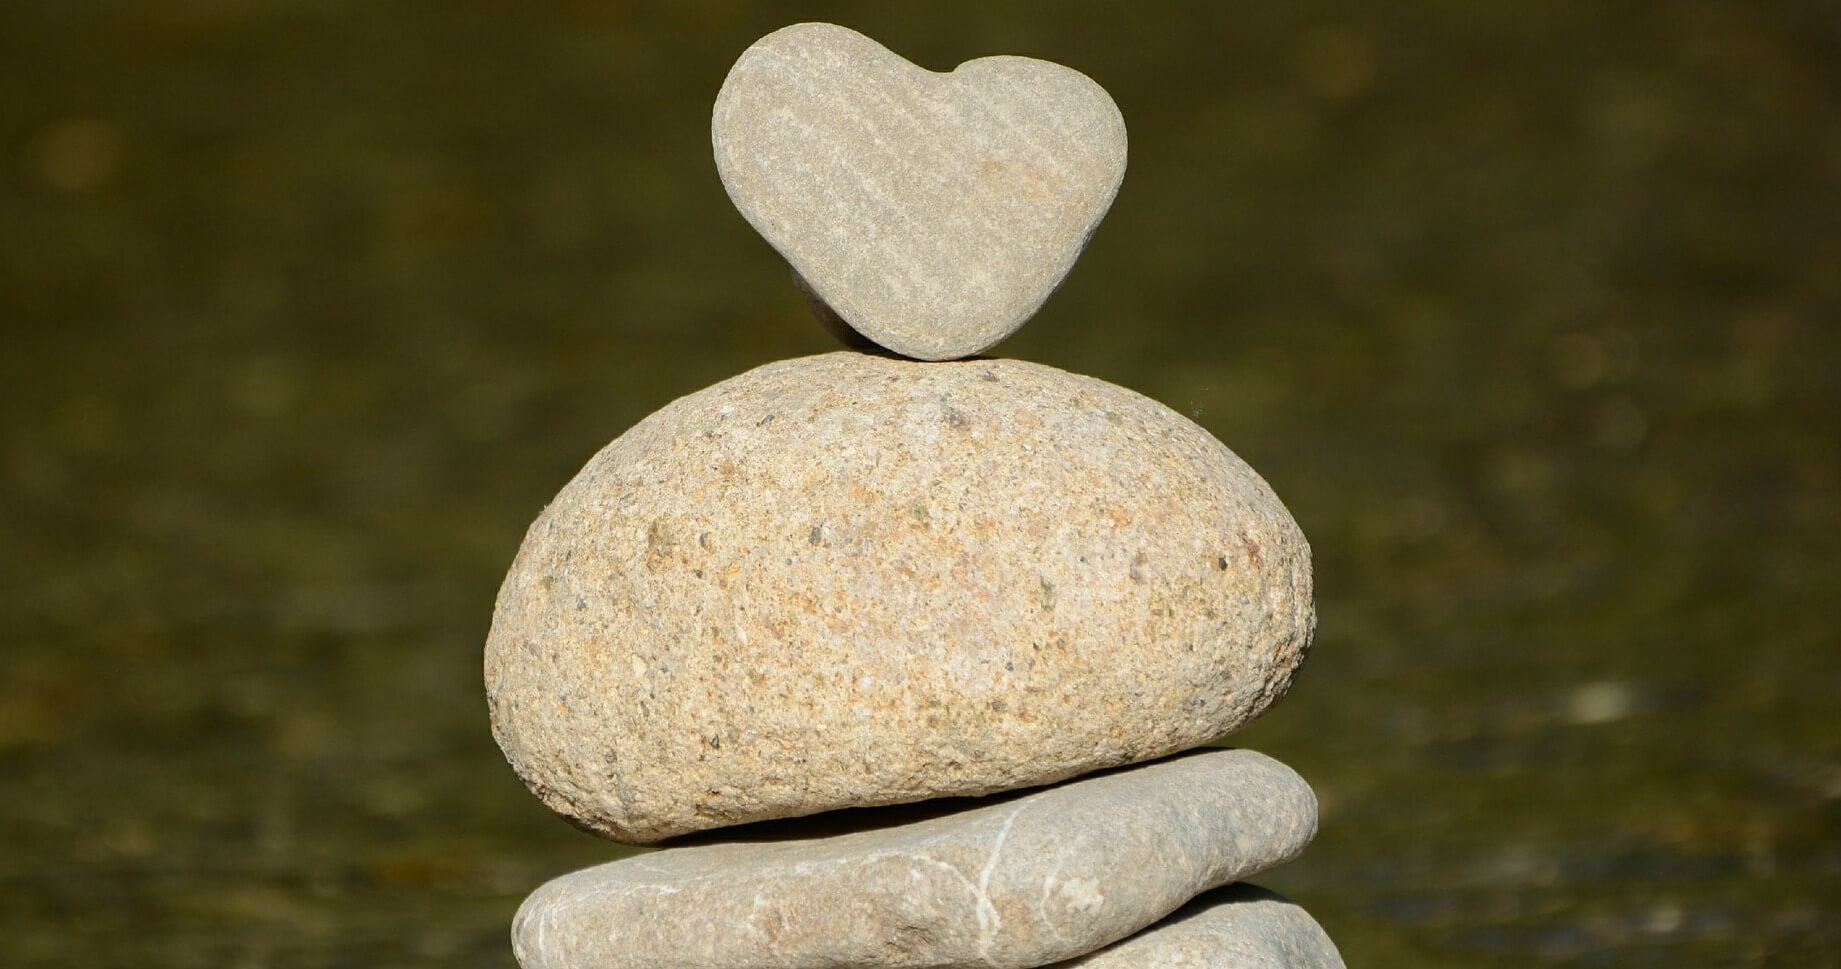 Cairn with heart January 2022 featured